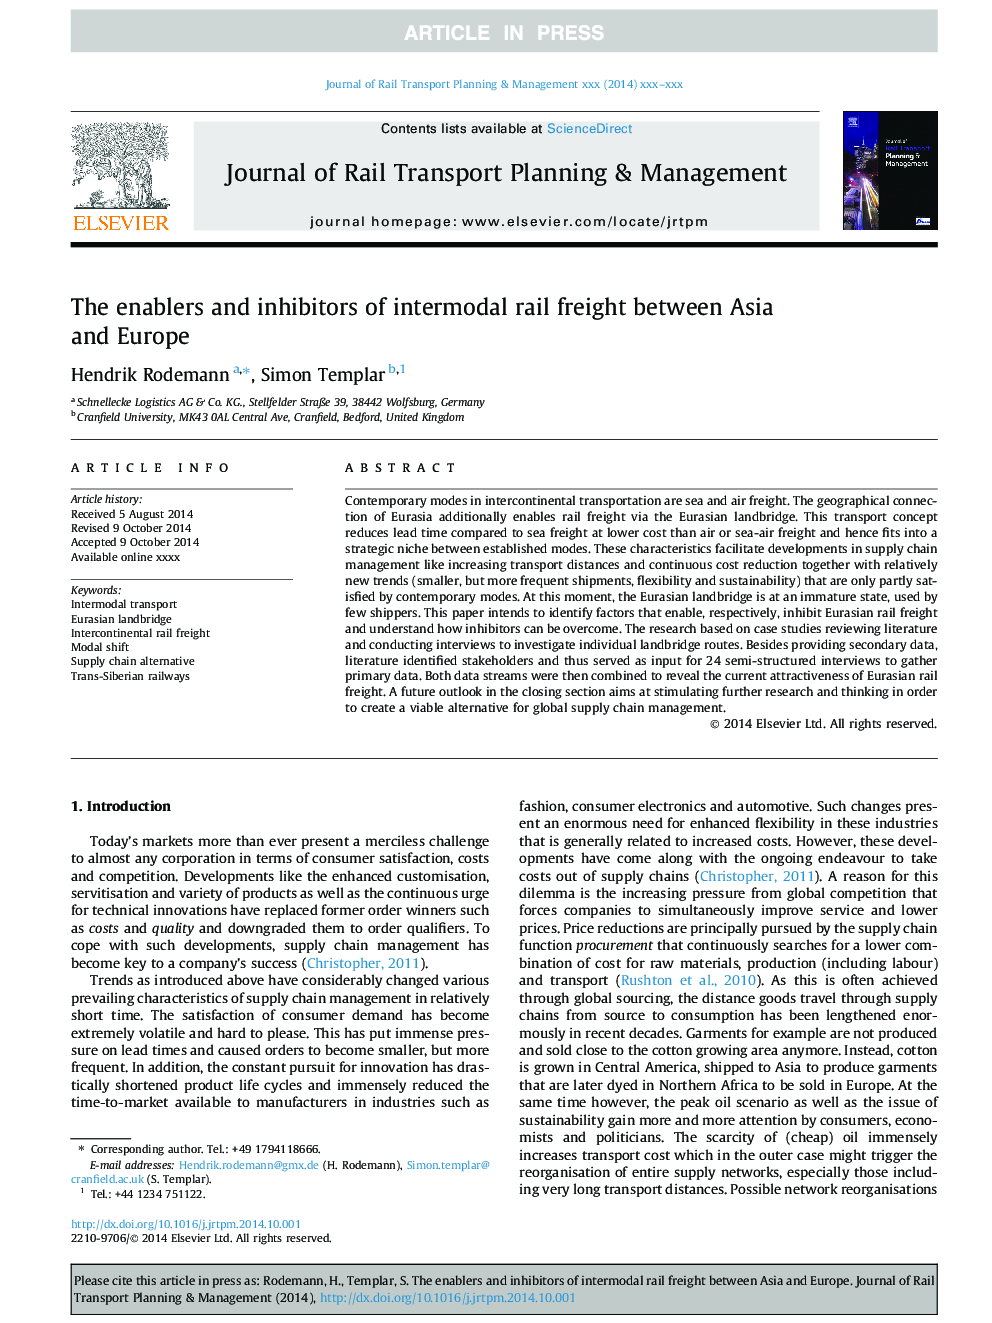 The enablers and inhibitors of intermodal rail freight between Asia and Europe